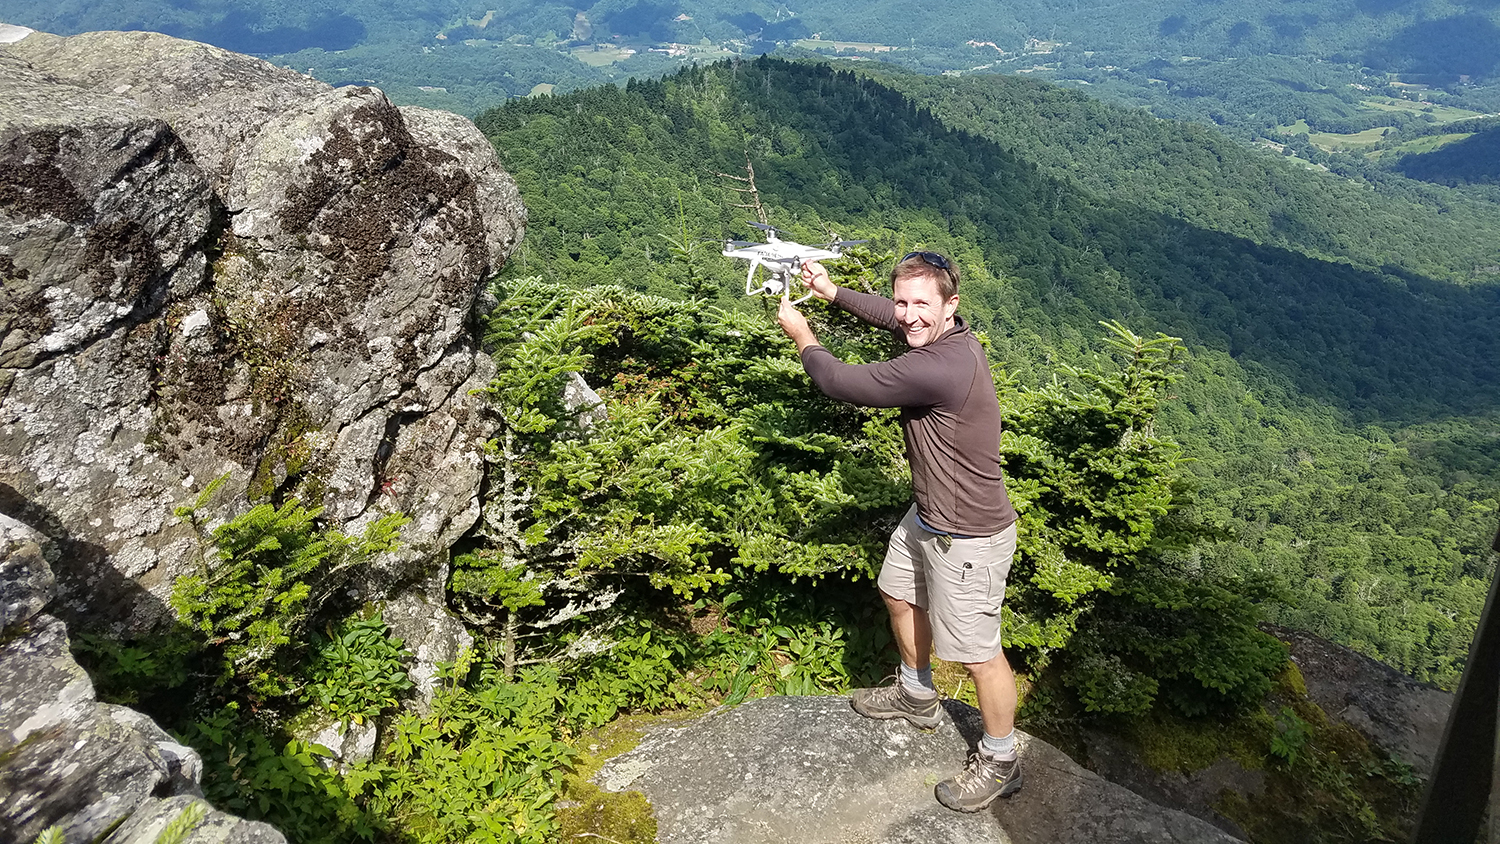 NC State University doctoral researcher Will Reckling prepares to launch a drone on Roan Mountain, NC, to map the area for endangered high-elevation plants.